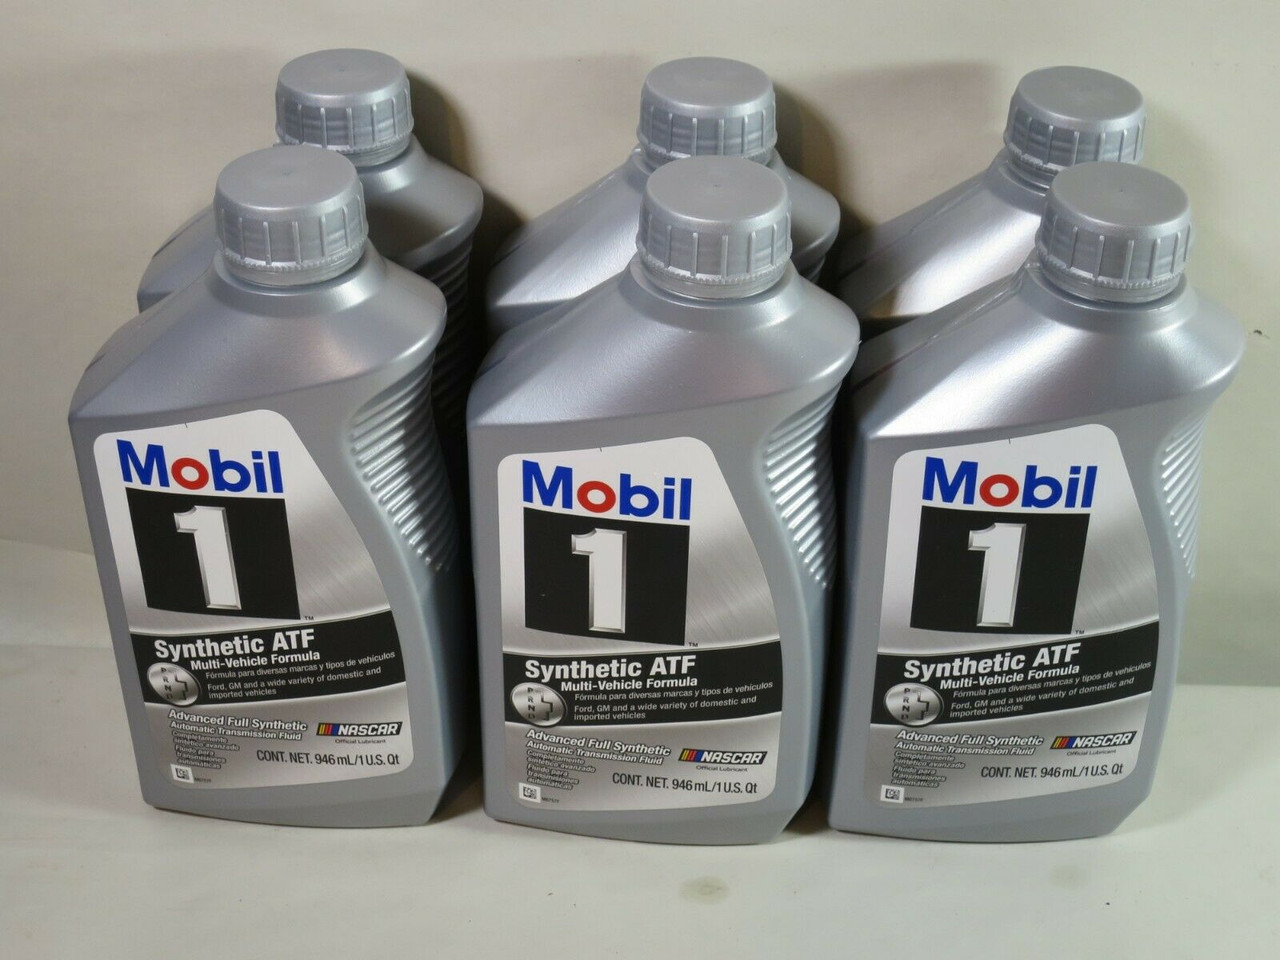 Mobil 1 Synthetic АТФ. Mobil 1 Synthetic ATF 152582. Mobil 1 syn ATF, кг. Mobil ATF 3324.